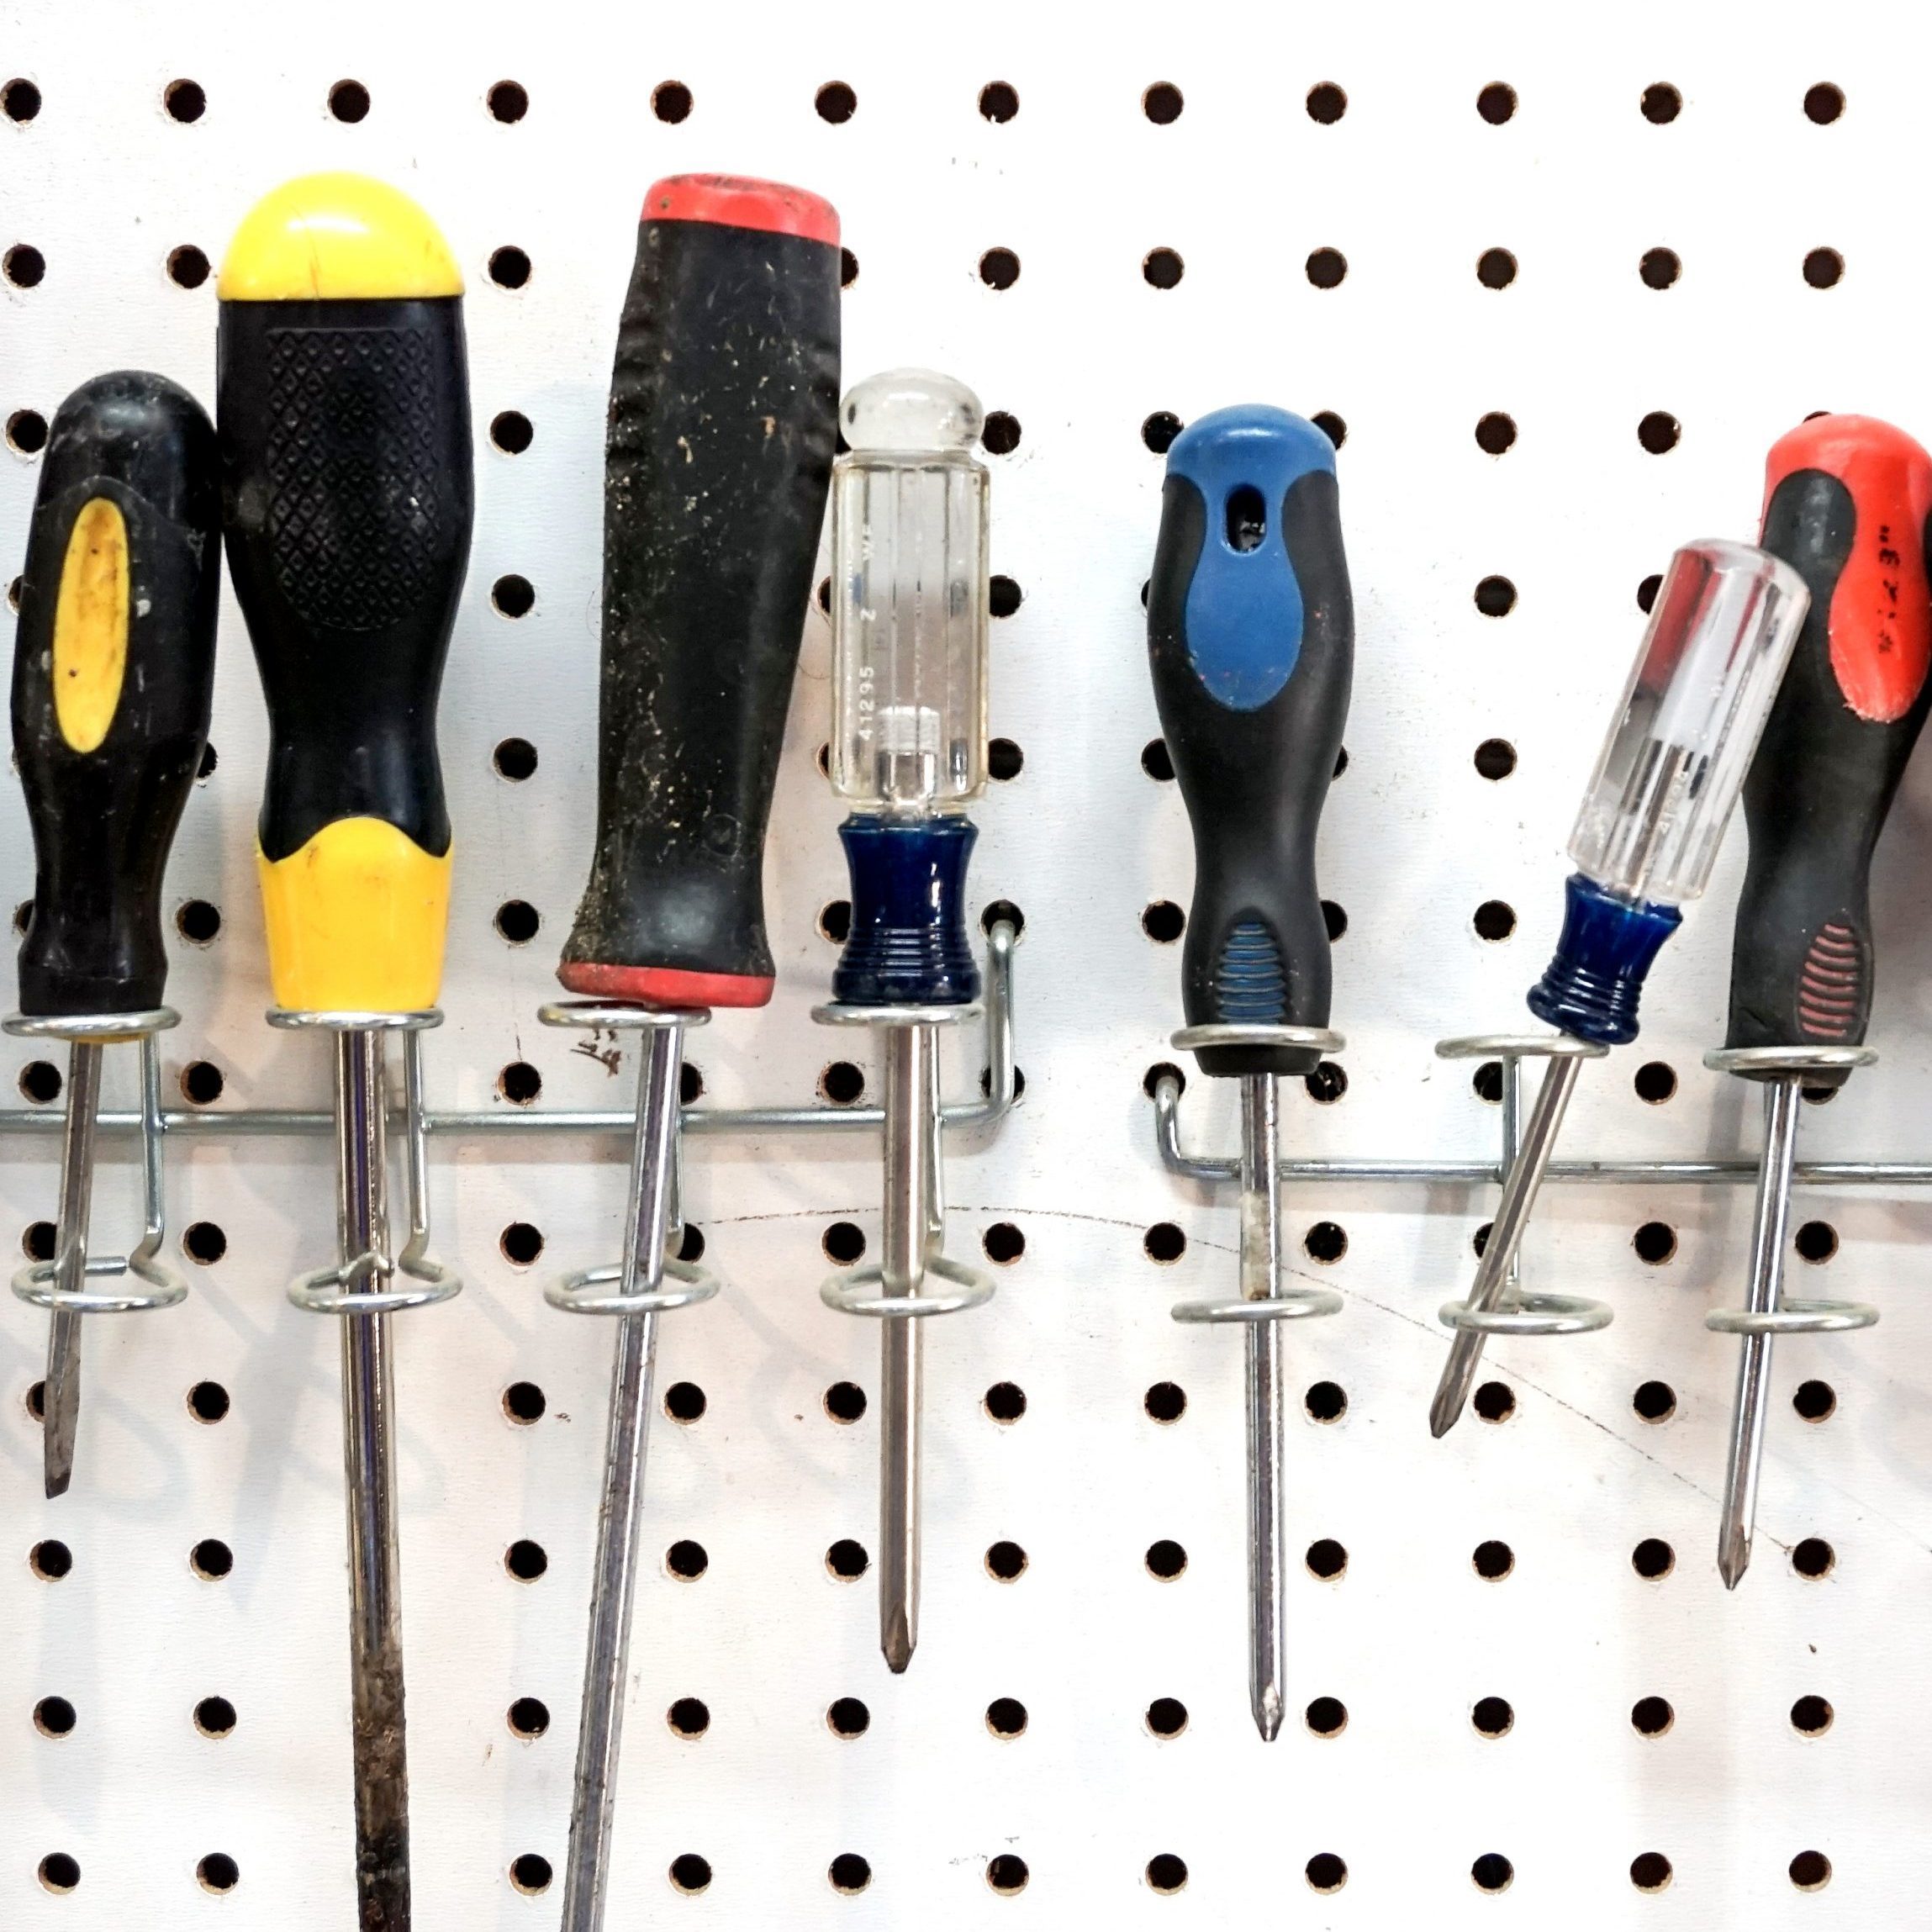 10 Screwdriver Types Every Toolbox Should Have